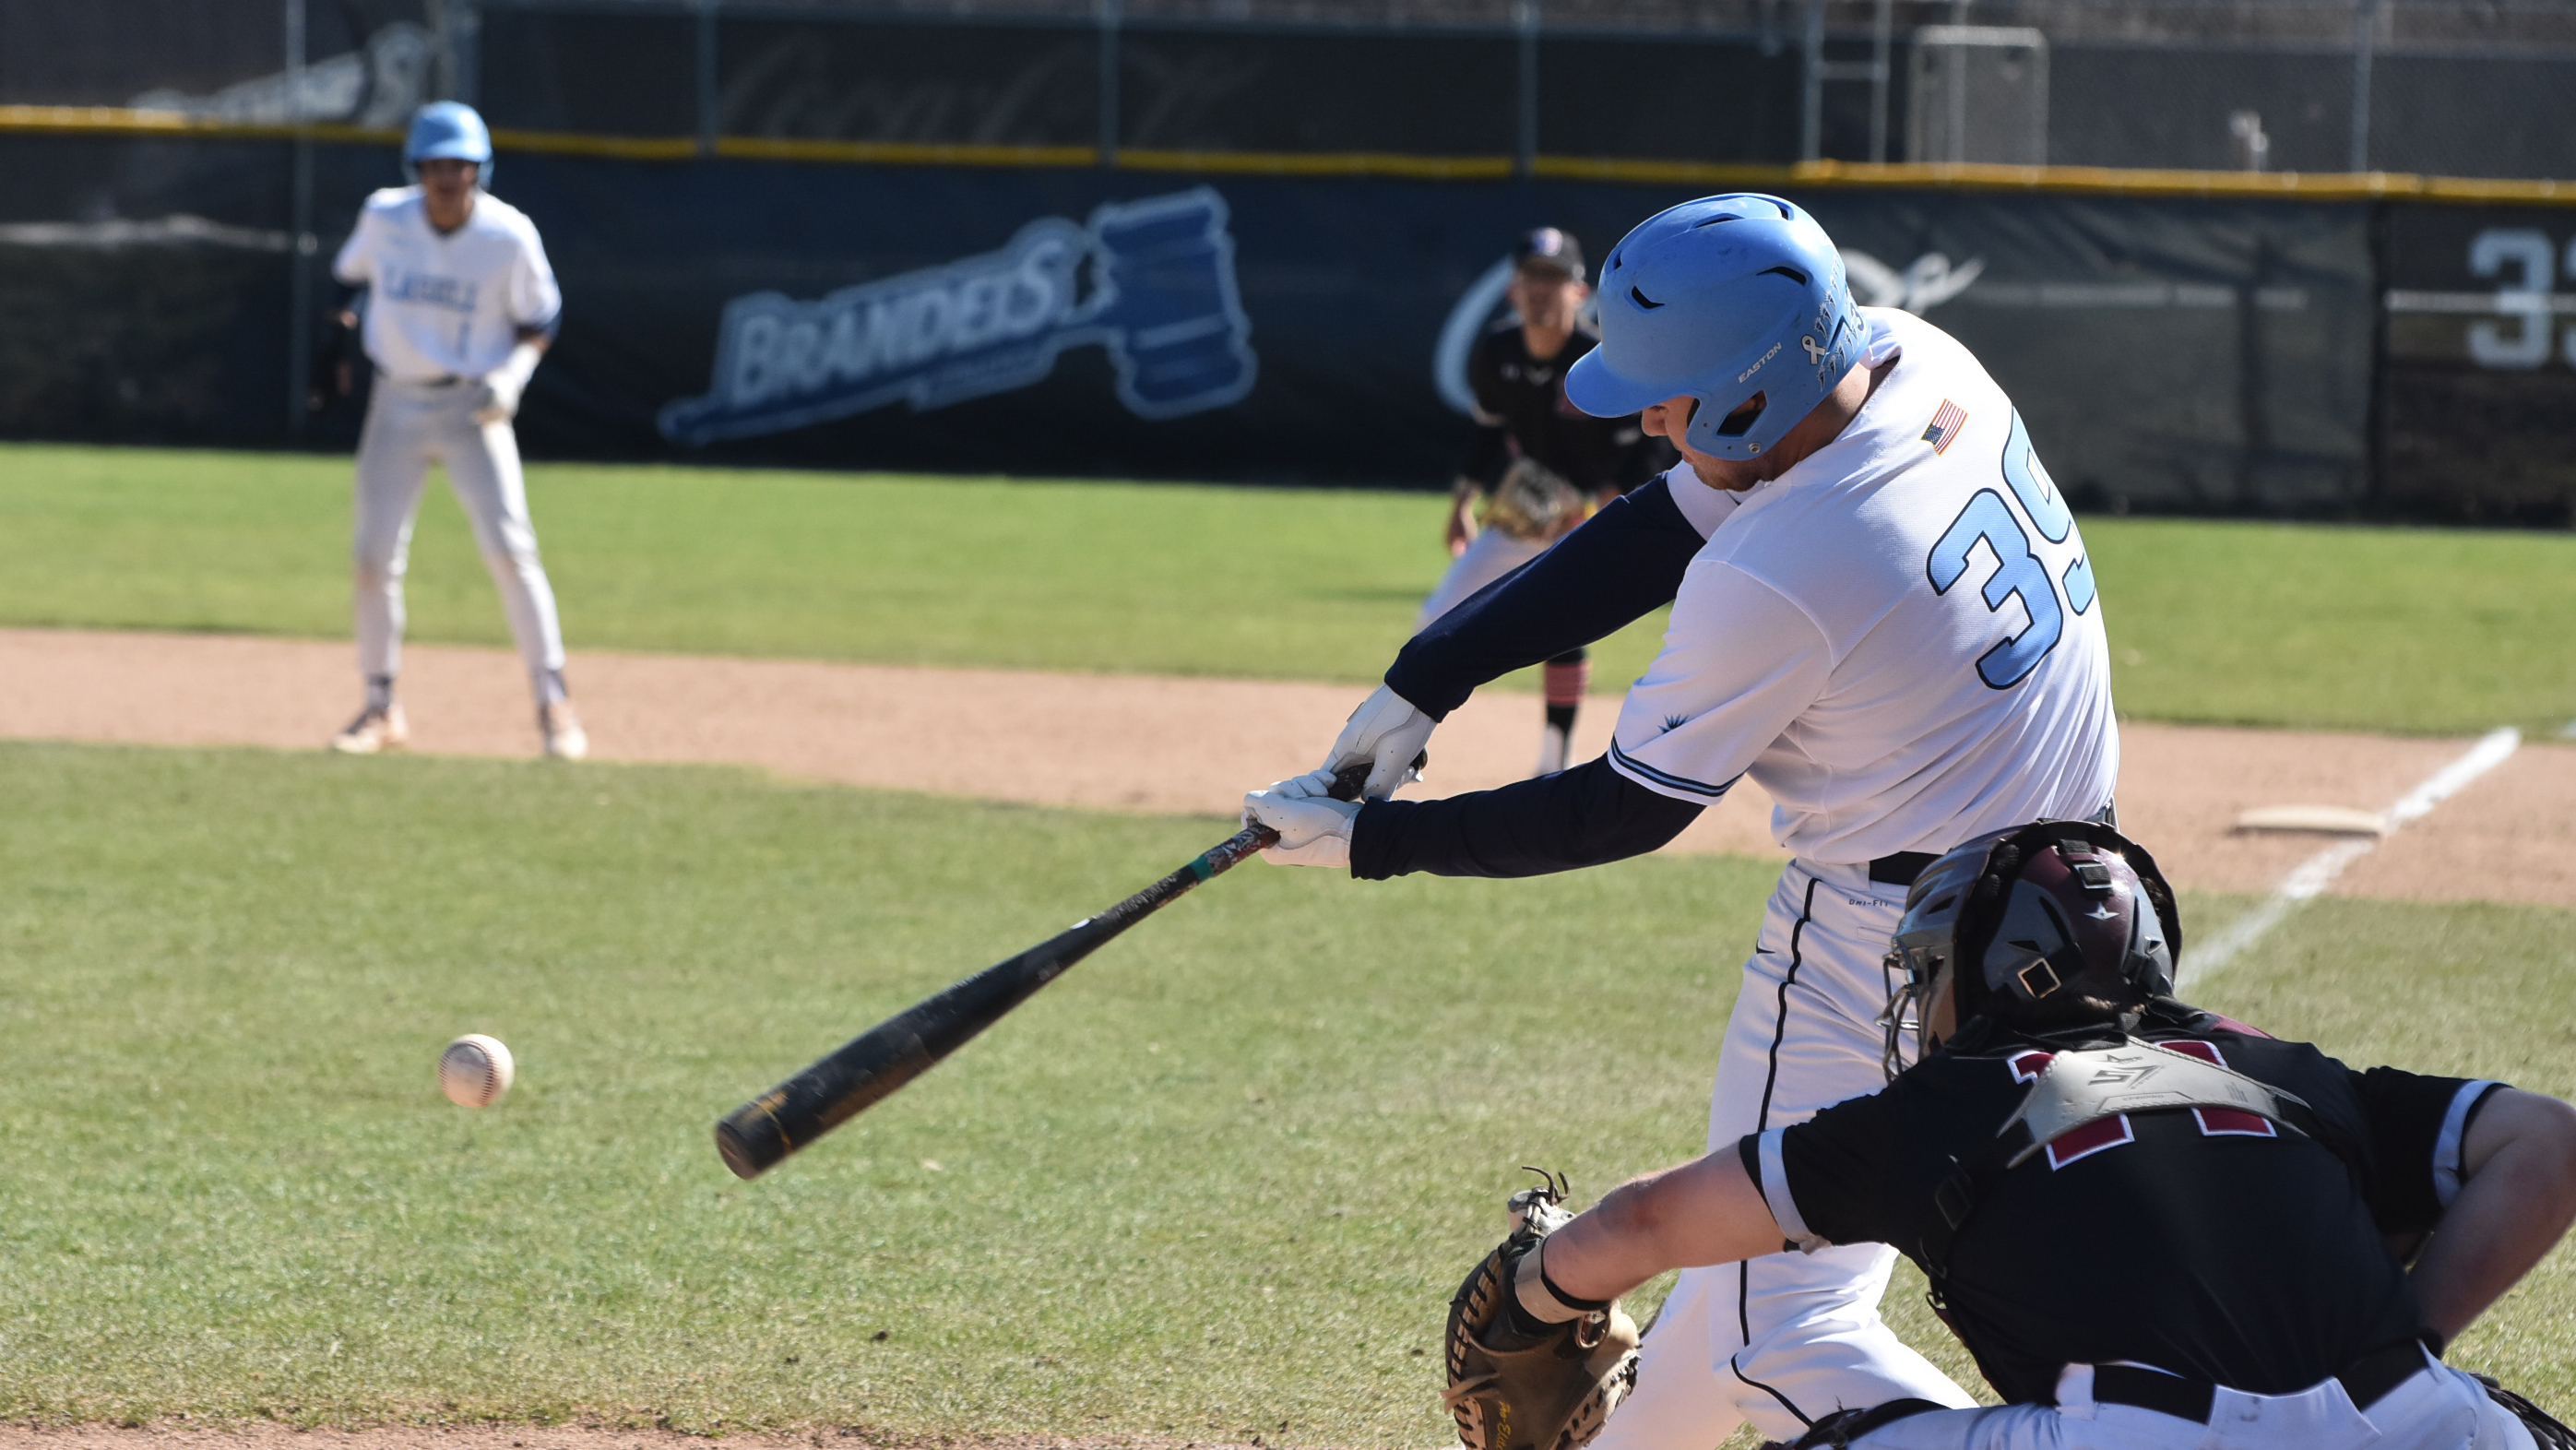 Baseball: Bischof adds to his single season home run record in loss to Curry